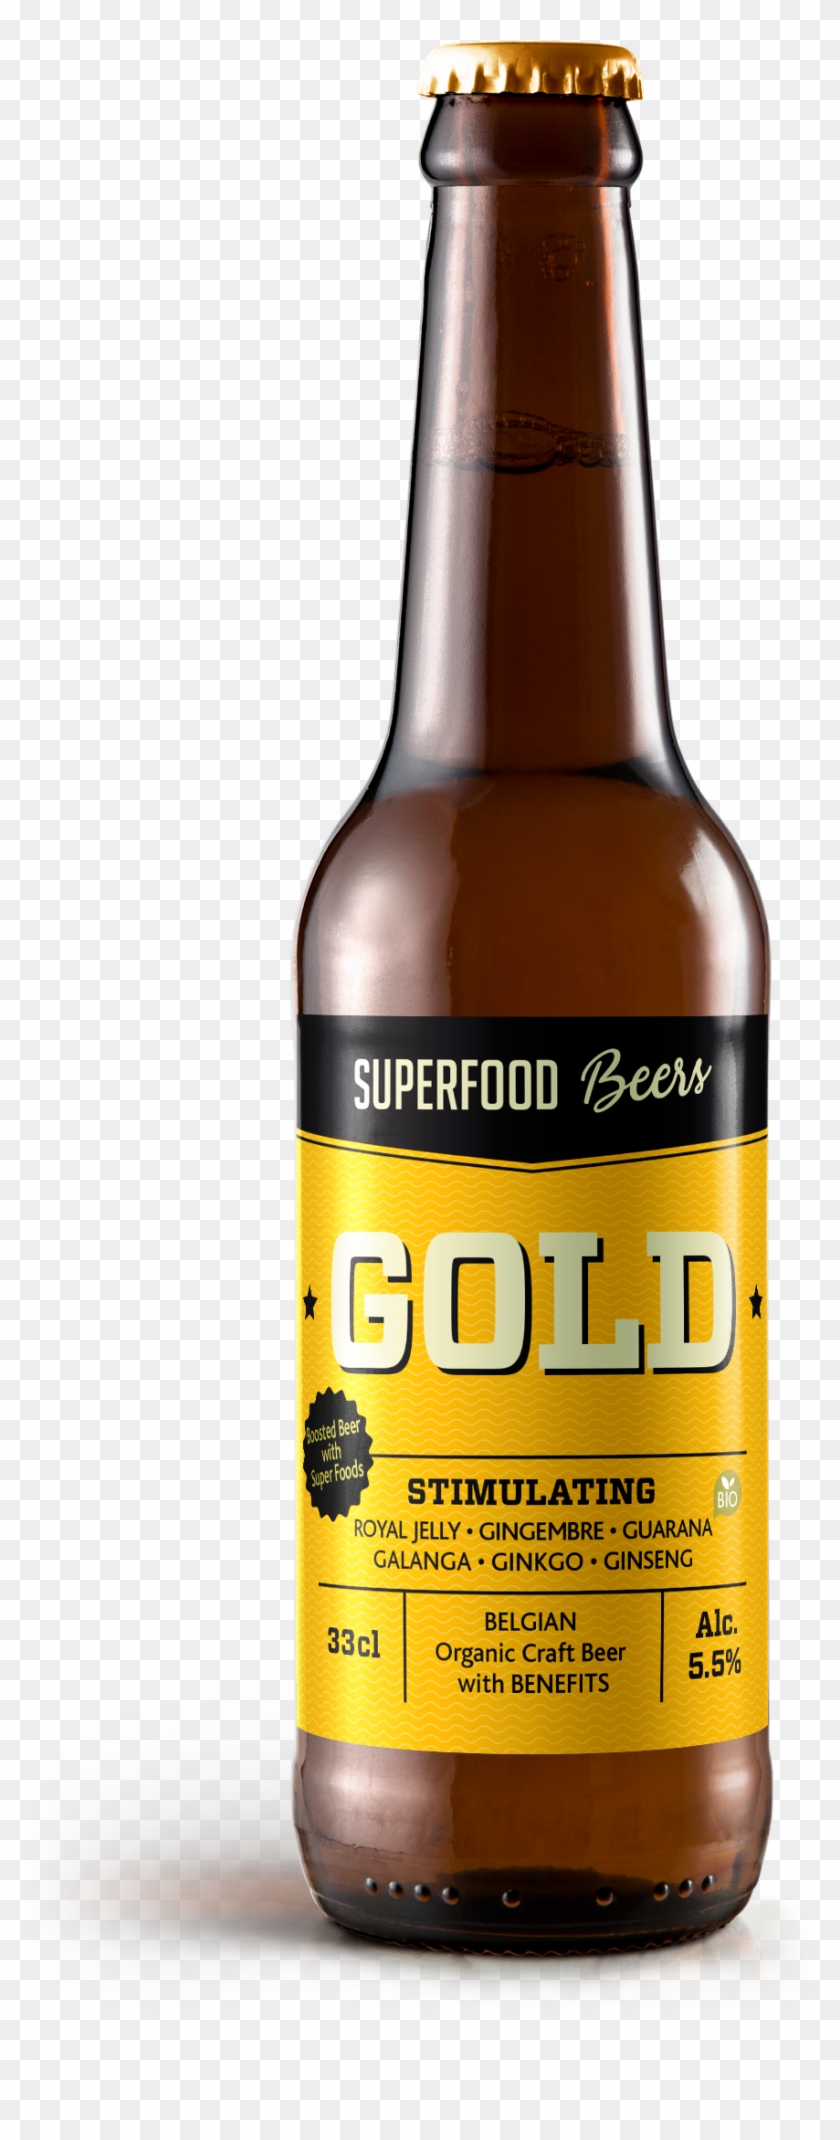 Superfood Product Product 191 - 5g Beer Clipart #3691392